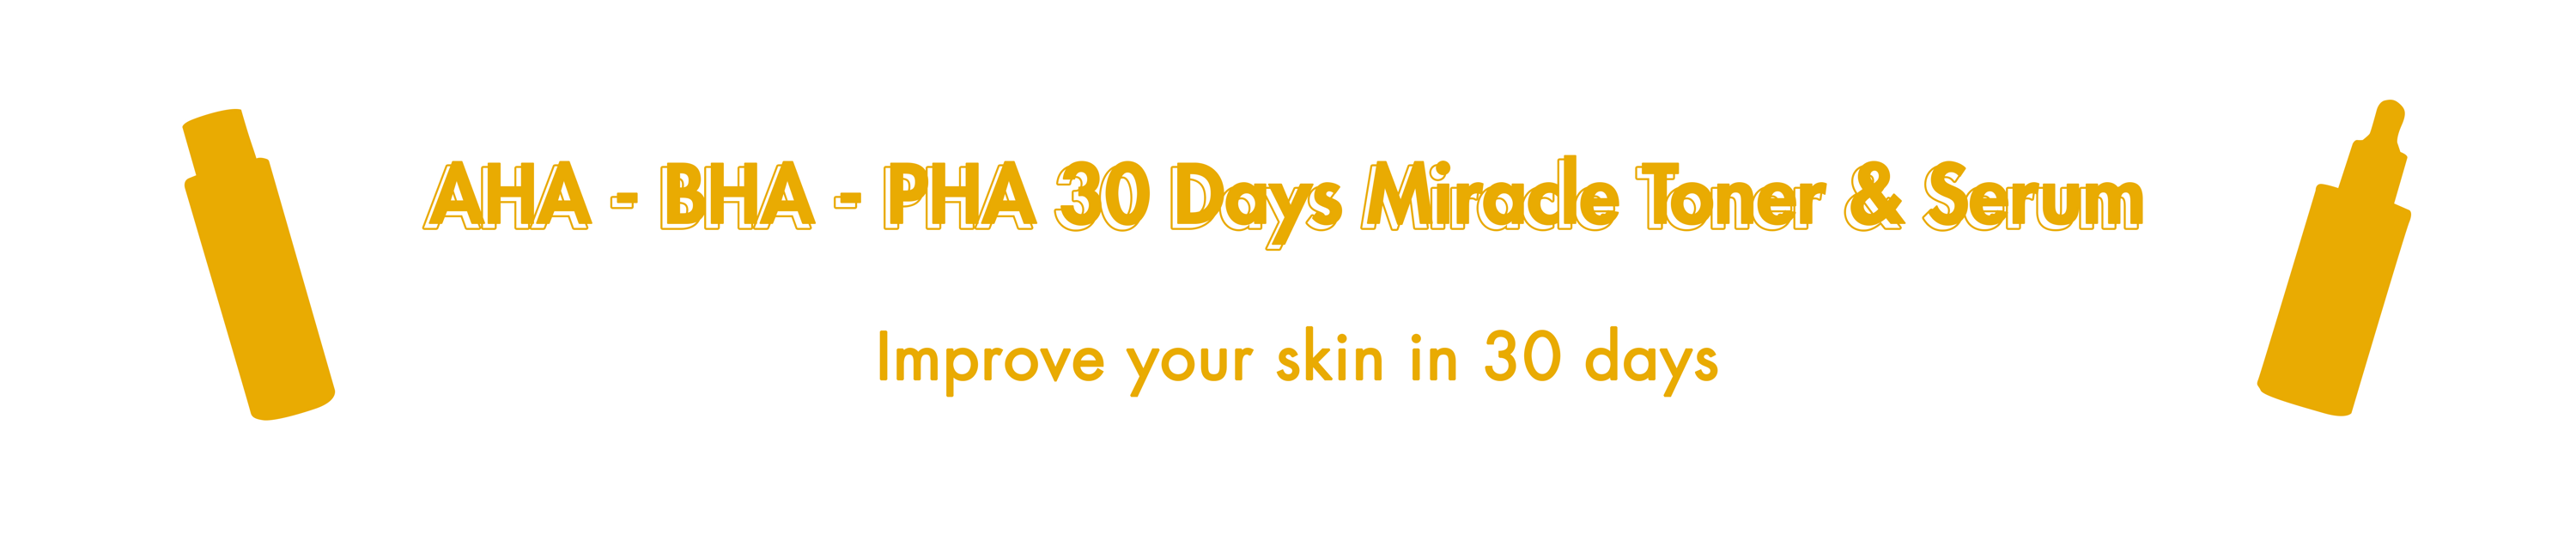 Improve your skin in 30 days